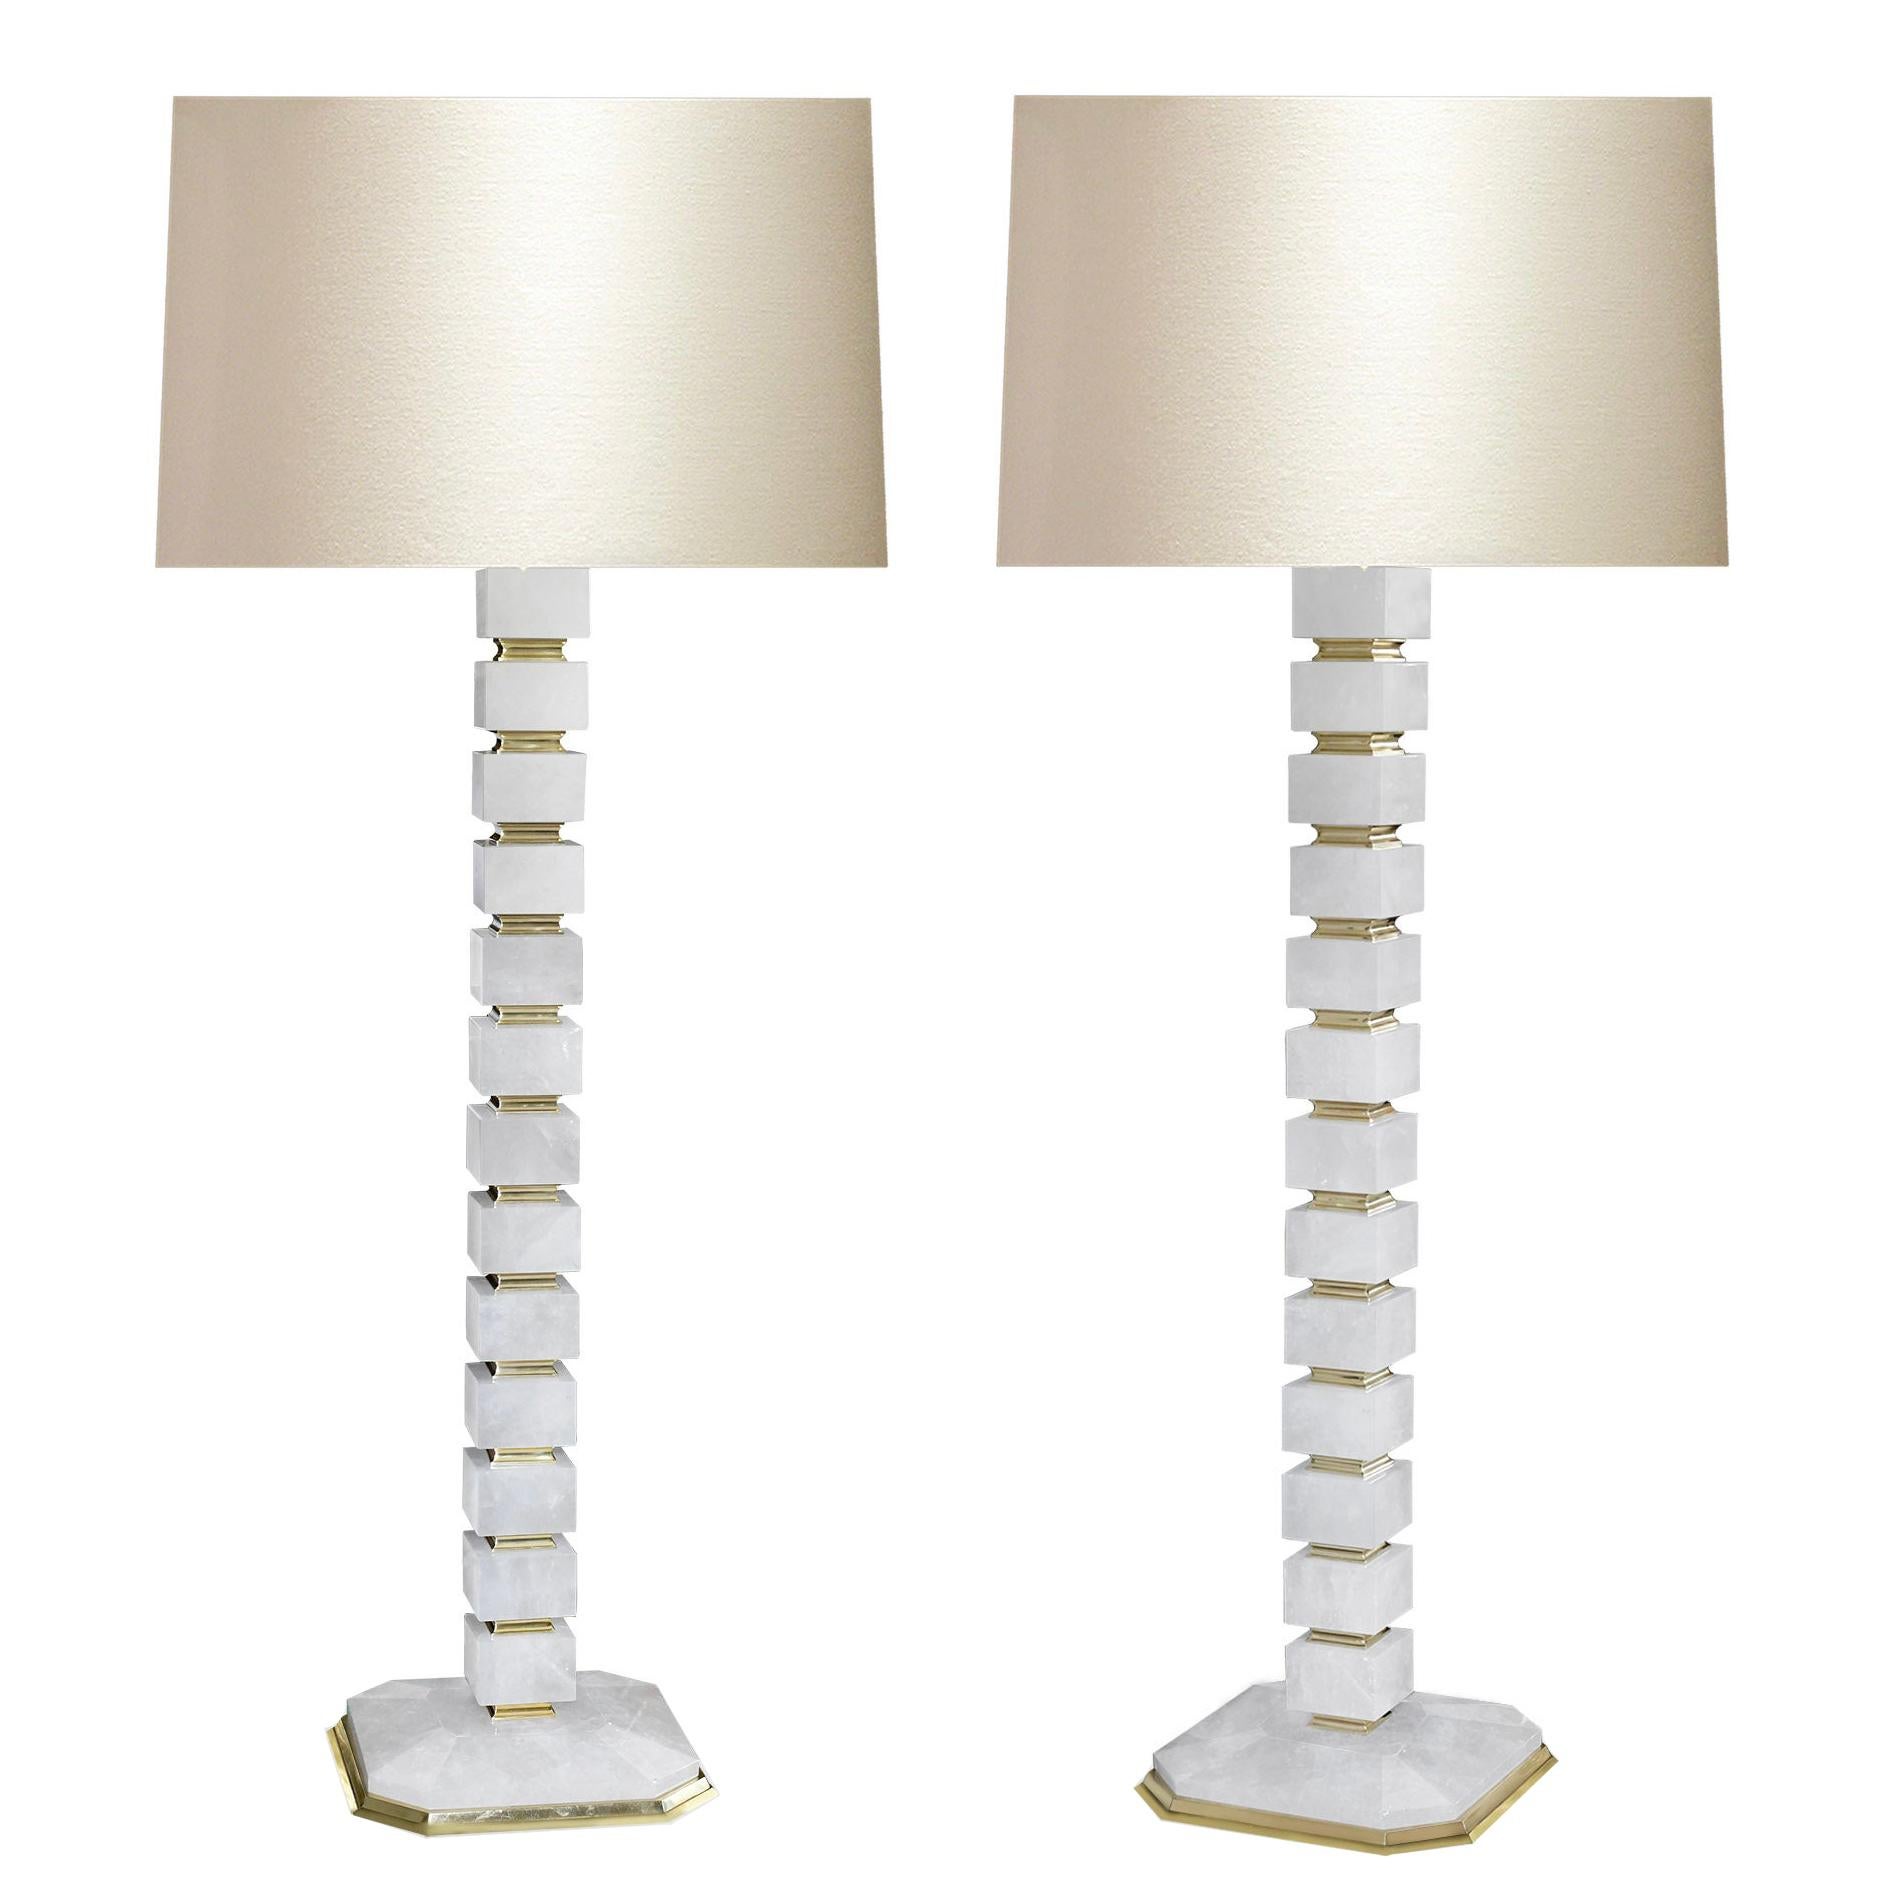 Pair of Contemporary Block Form Rock Crystal Floor Lamps by Phoenix For Sale